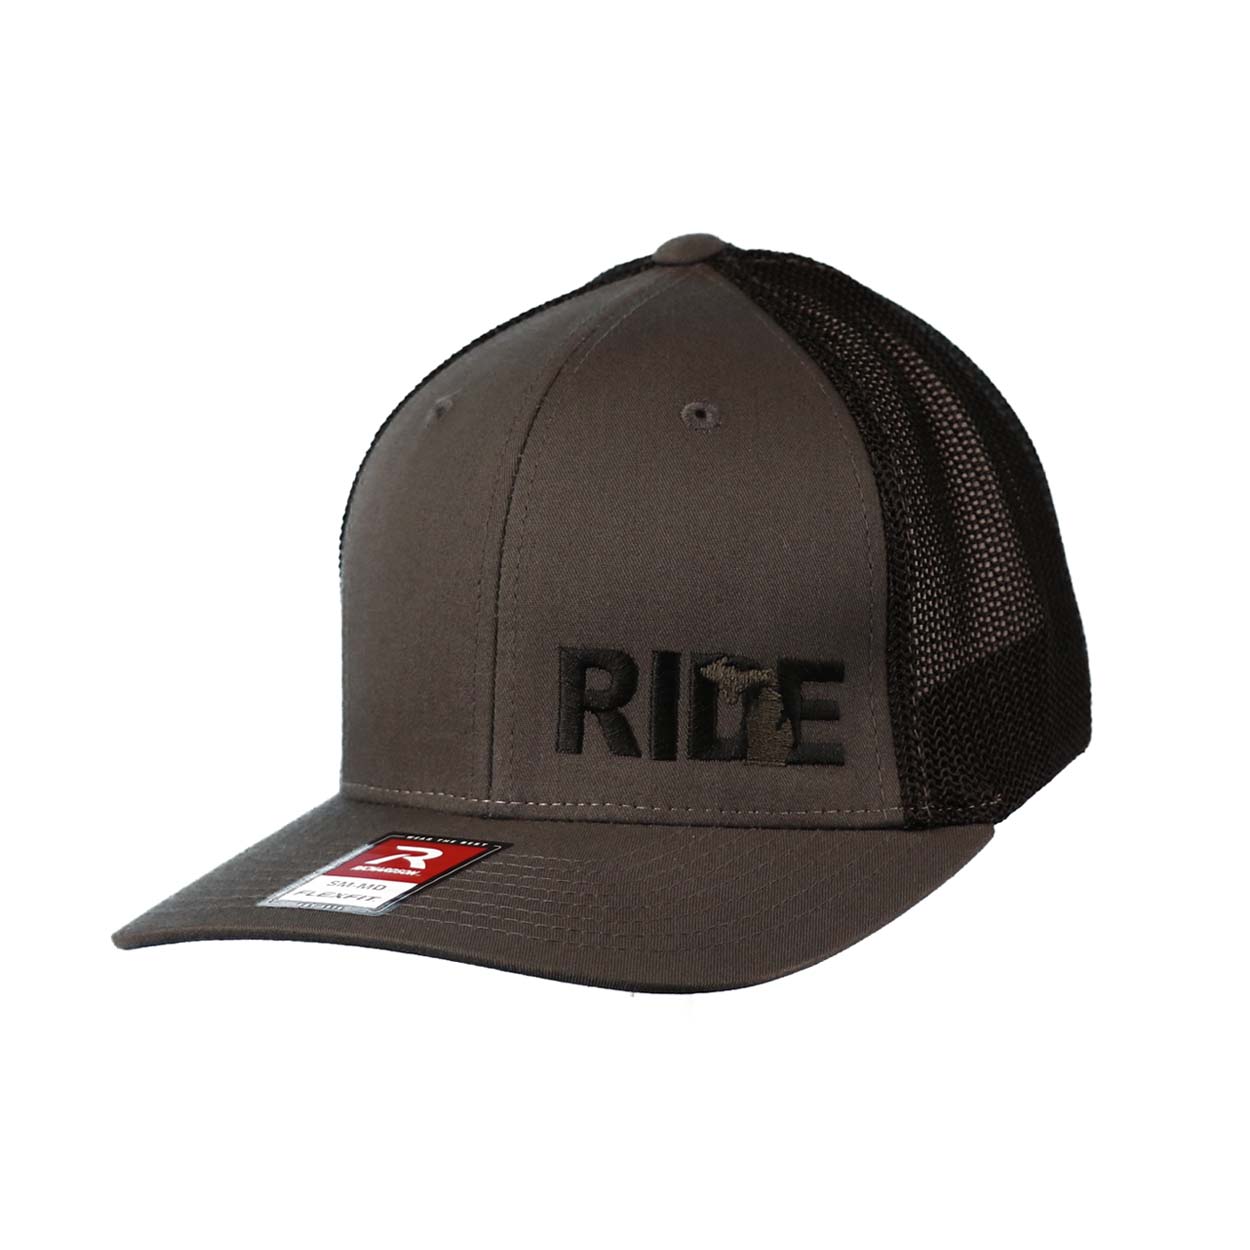 Ride Michigan Night Out Embroidered Trucker Flex Fit Hat Gray/Black